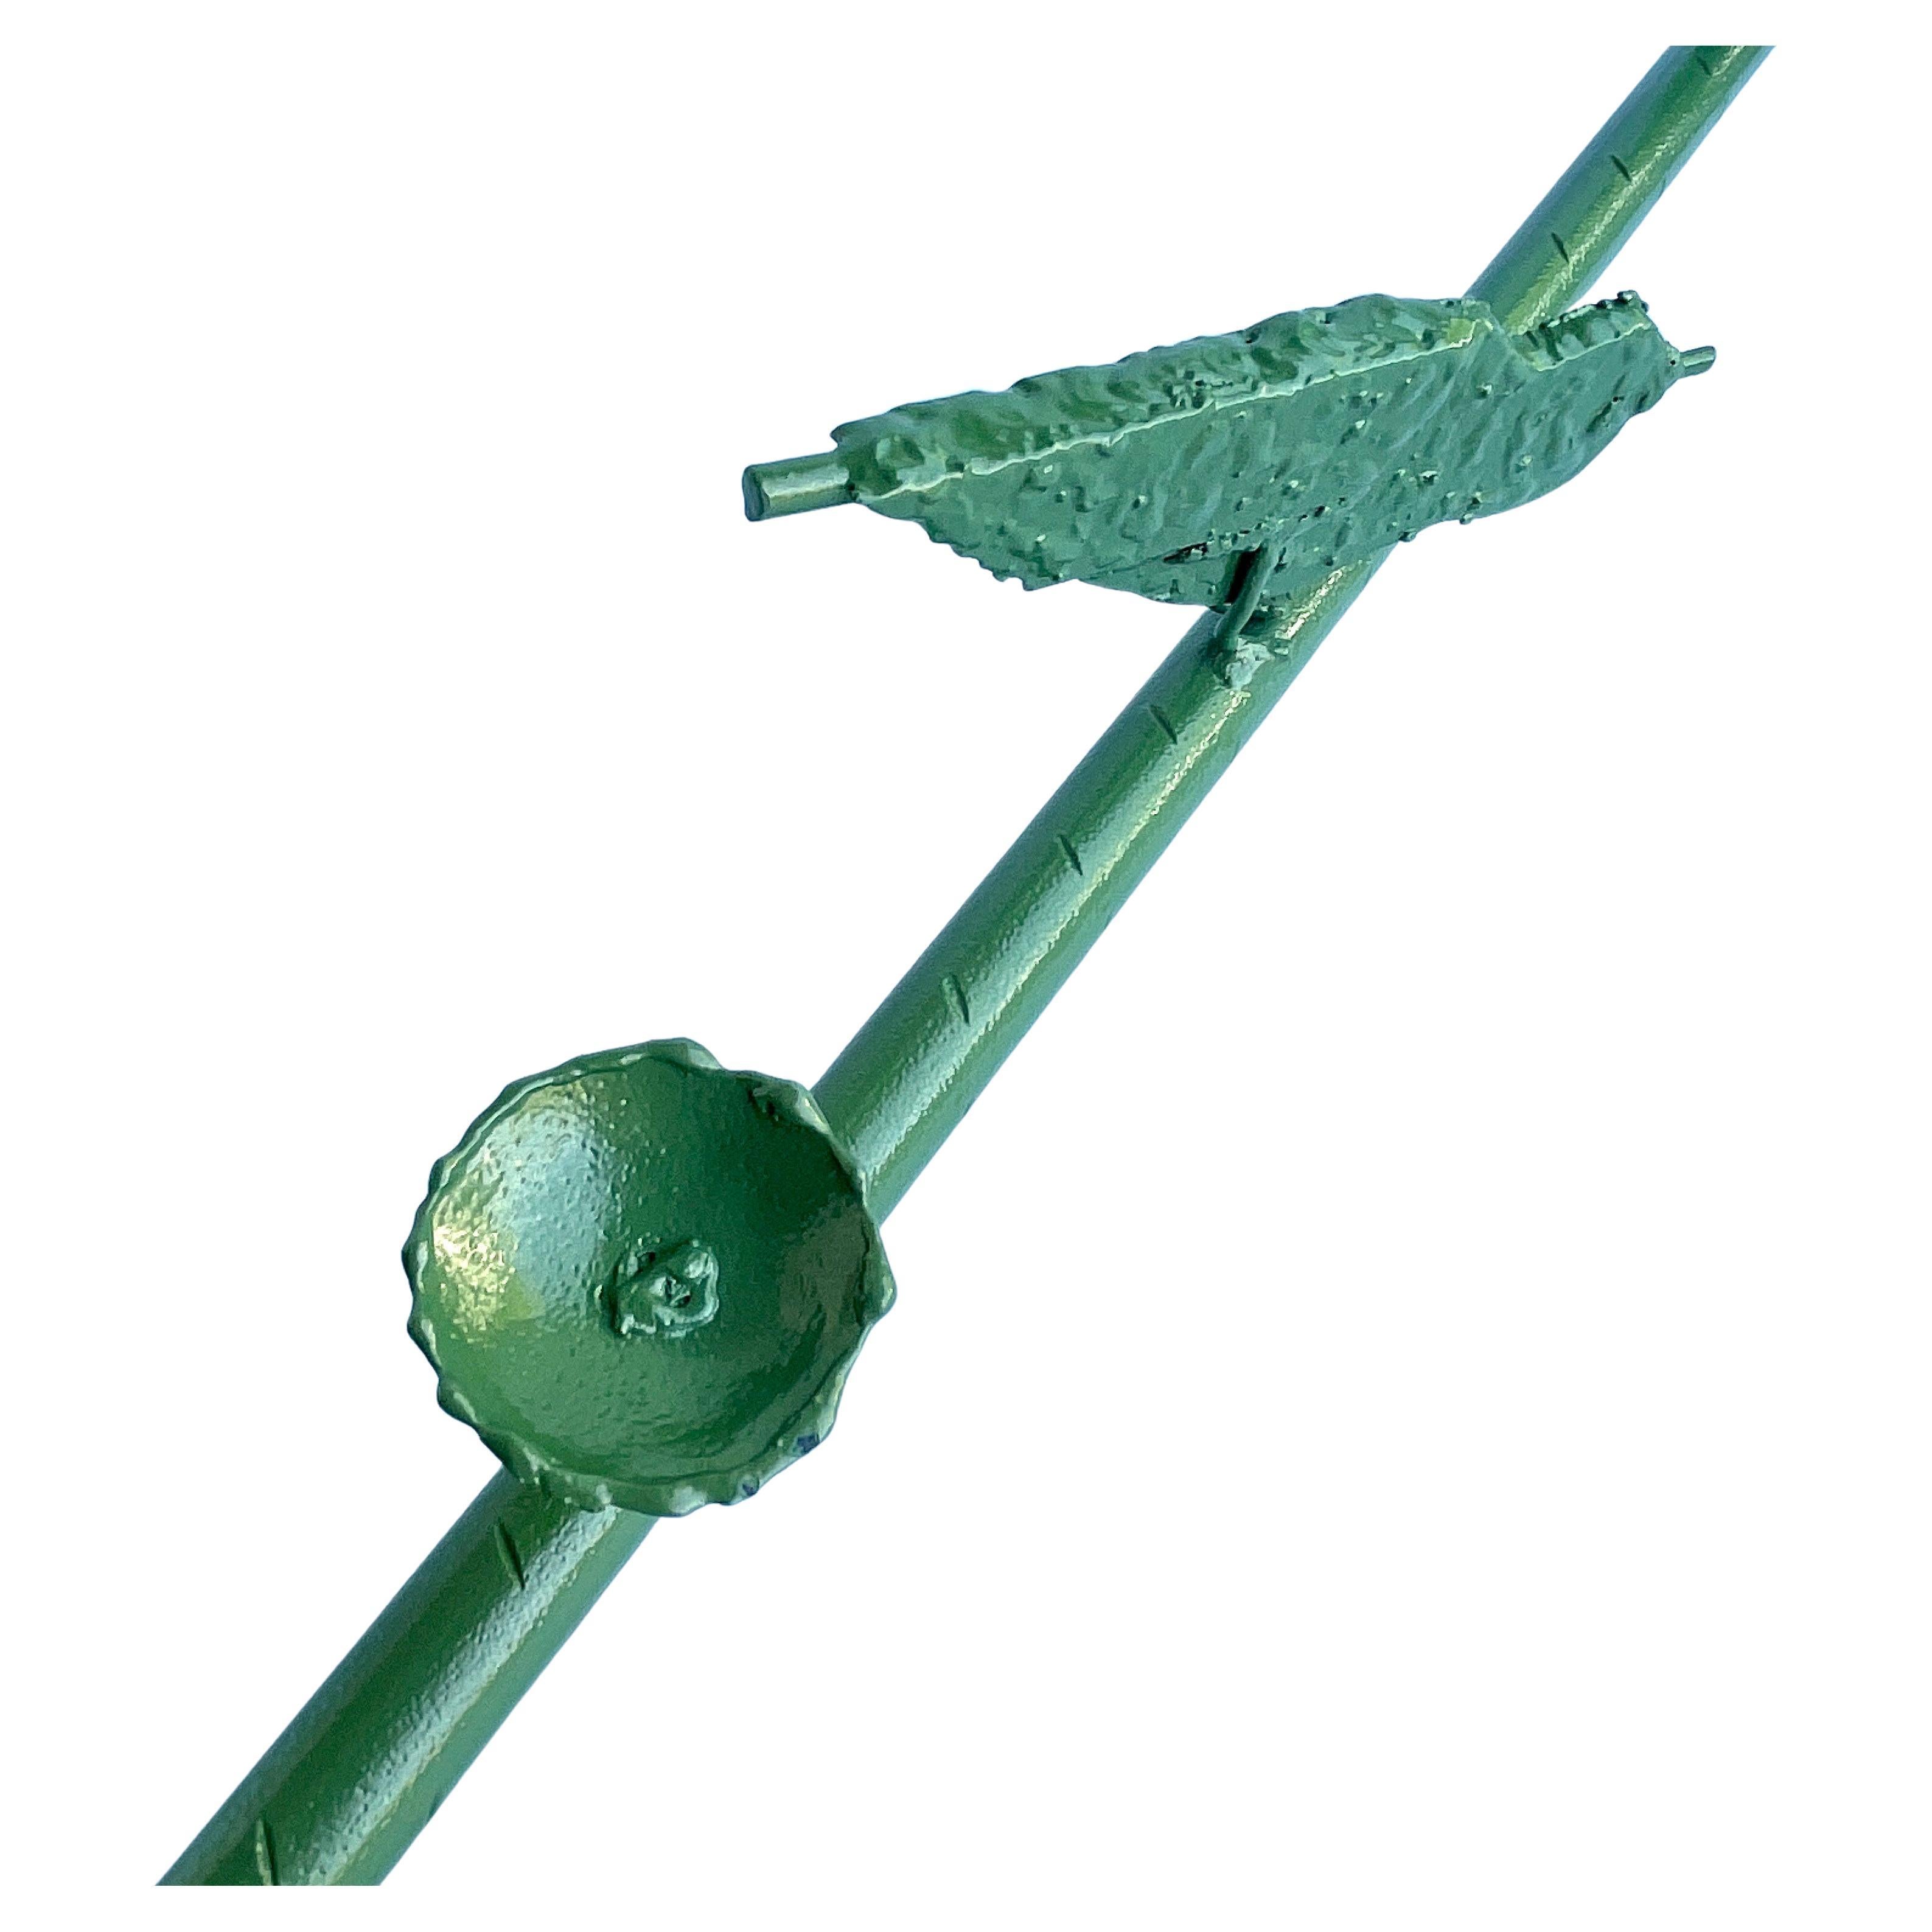 Wrought Iron Hand-Crafted Iron Wall Bar Rod With Birds, Green Powder-Coated For Sale